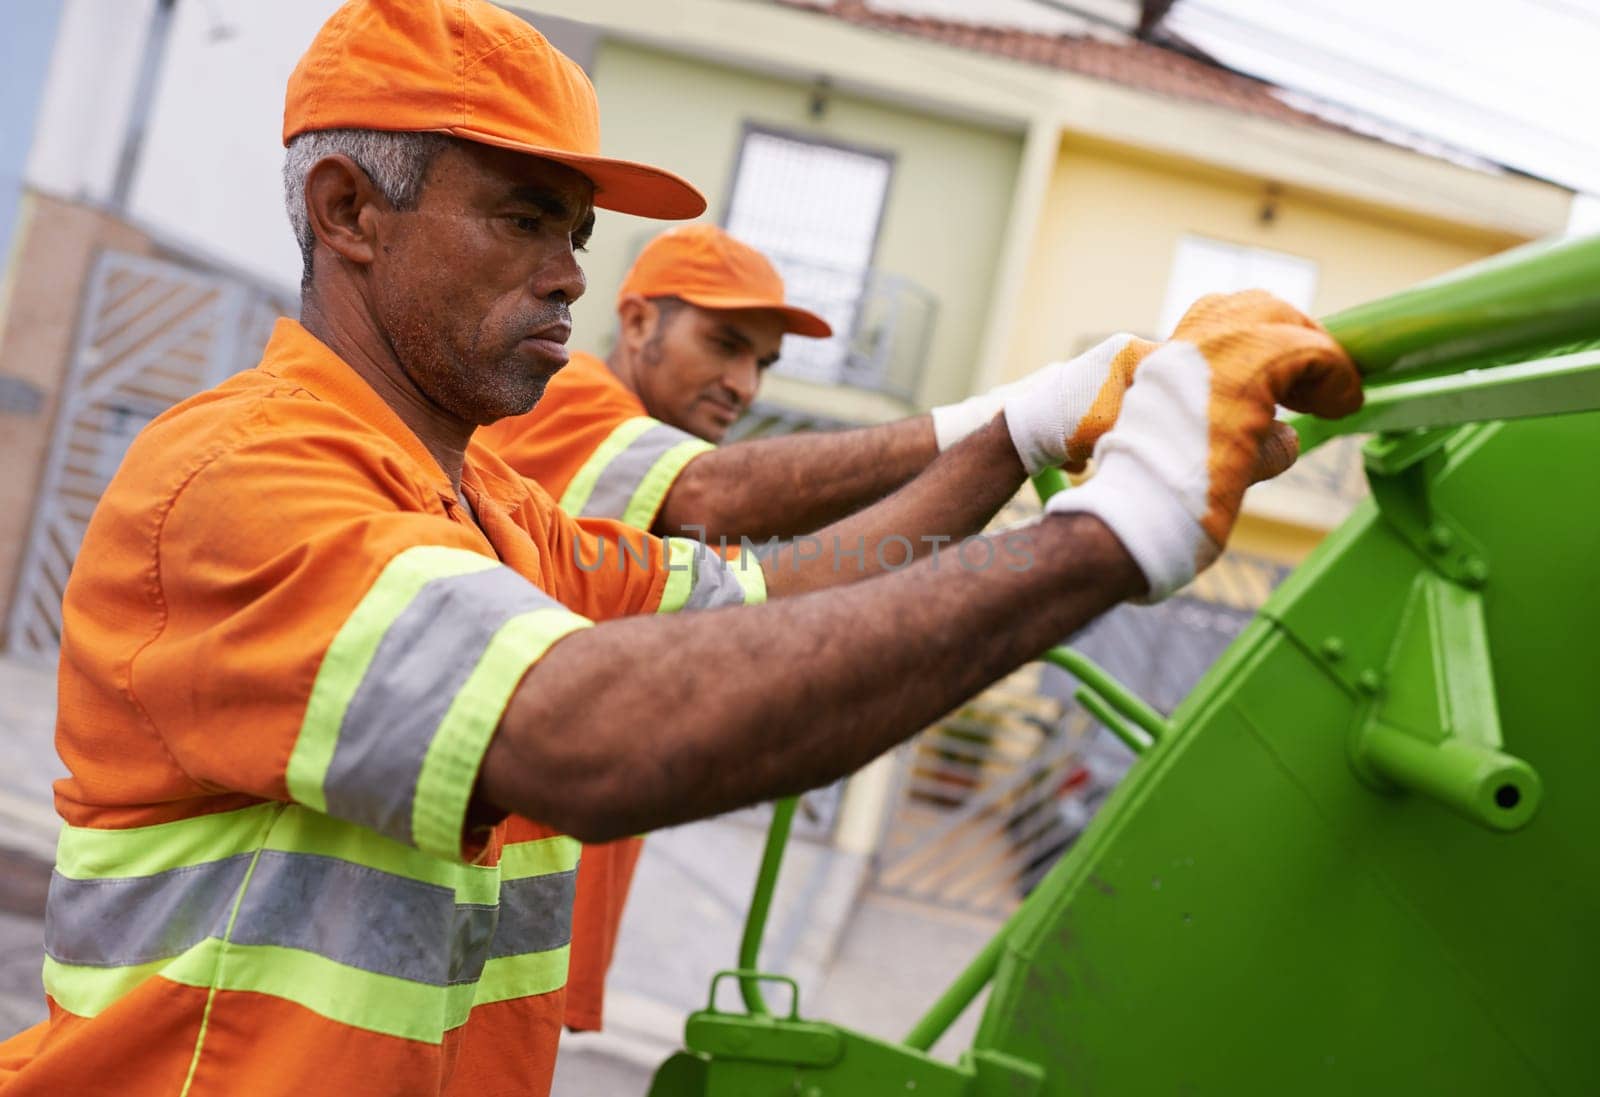 Garbage truck, men and cleaning the city for waste management and teamwork with routine and service. Employees, recycle and sanitation with transportation and green energy with trash and vehicle.